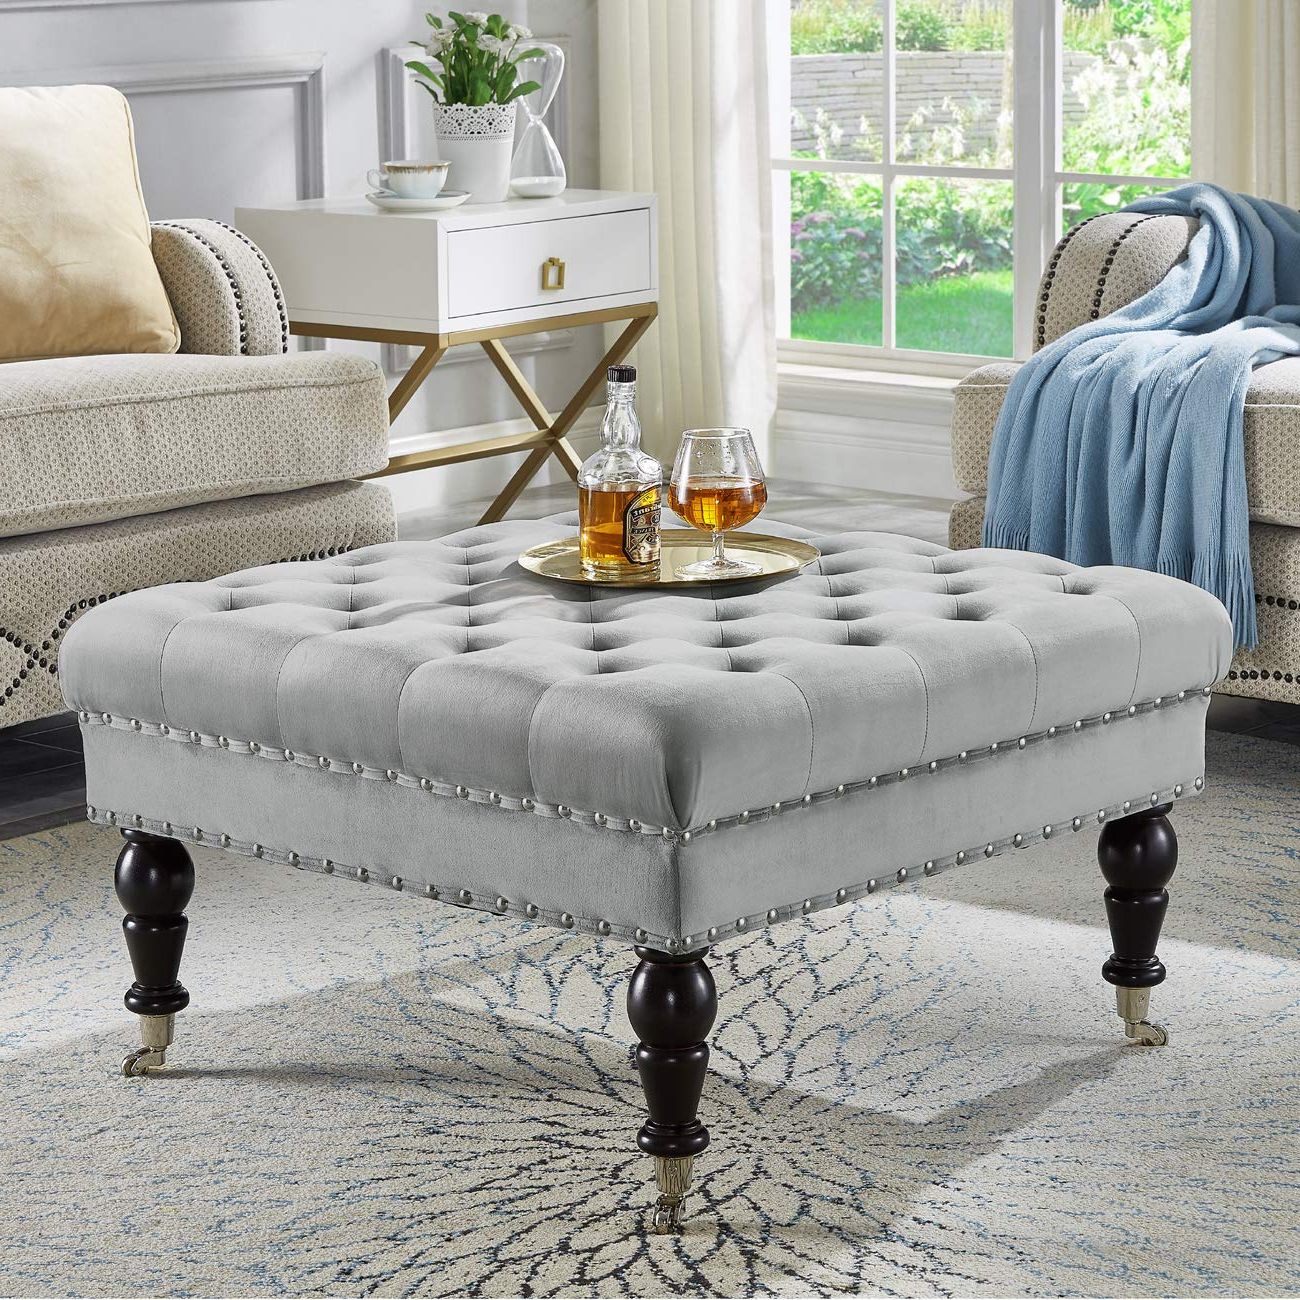 Widely Used Amazon: 24kf Large Square Upholstered Tufted Button Velvet Ottoman  Coffee Table , Large Footrest Bench With Caters Rolling Wheels Gray : Home  & Kitchen Throughout Upholstery Soft Silver Ottomans (View 7 of 10)